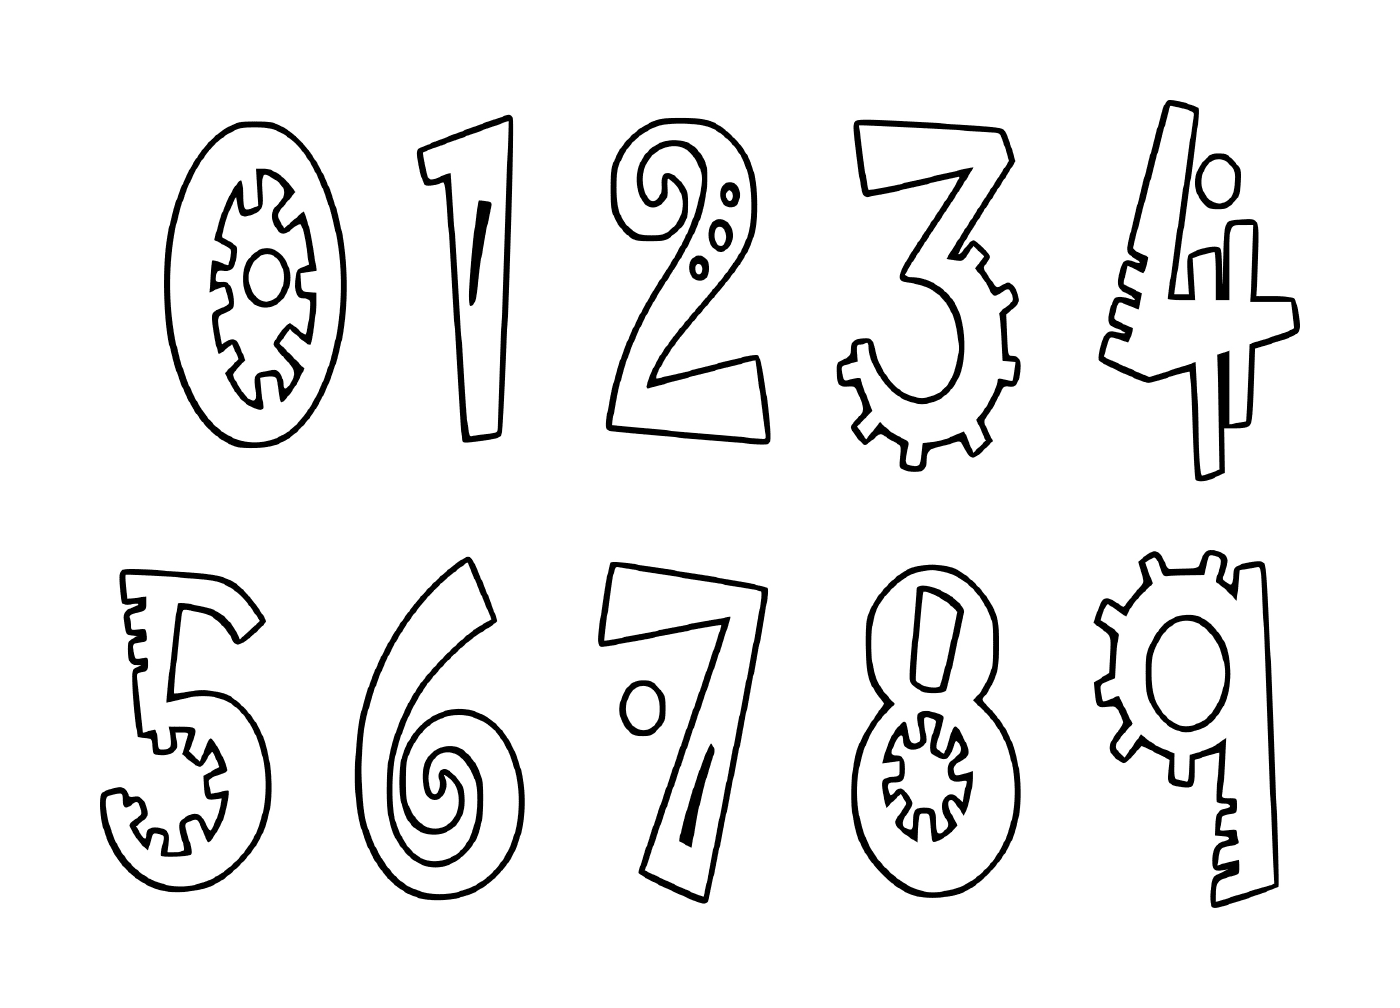  Set of digits from zero to nine drawn in black ink 